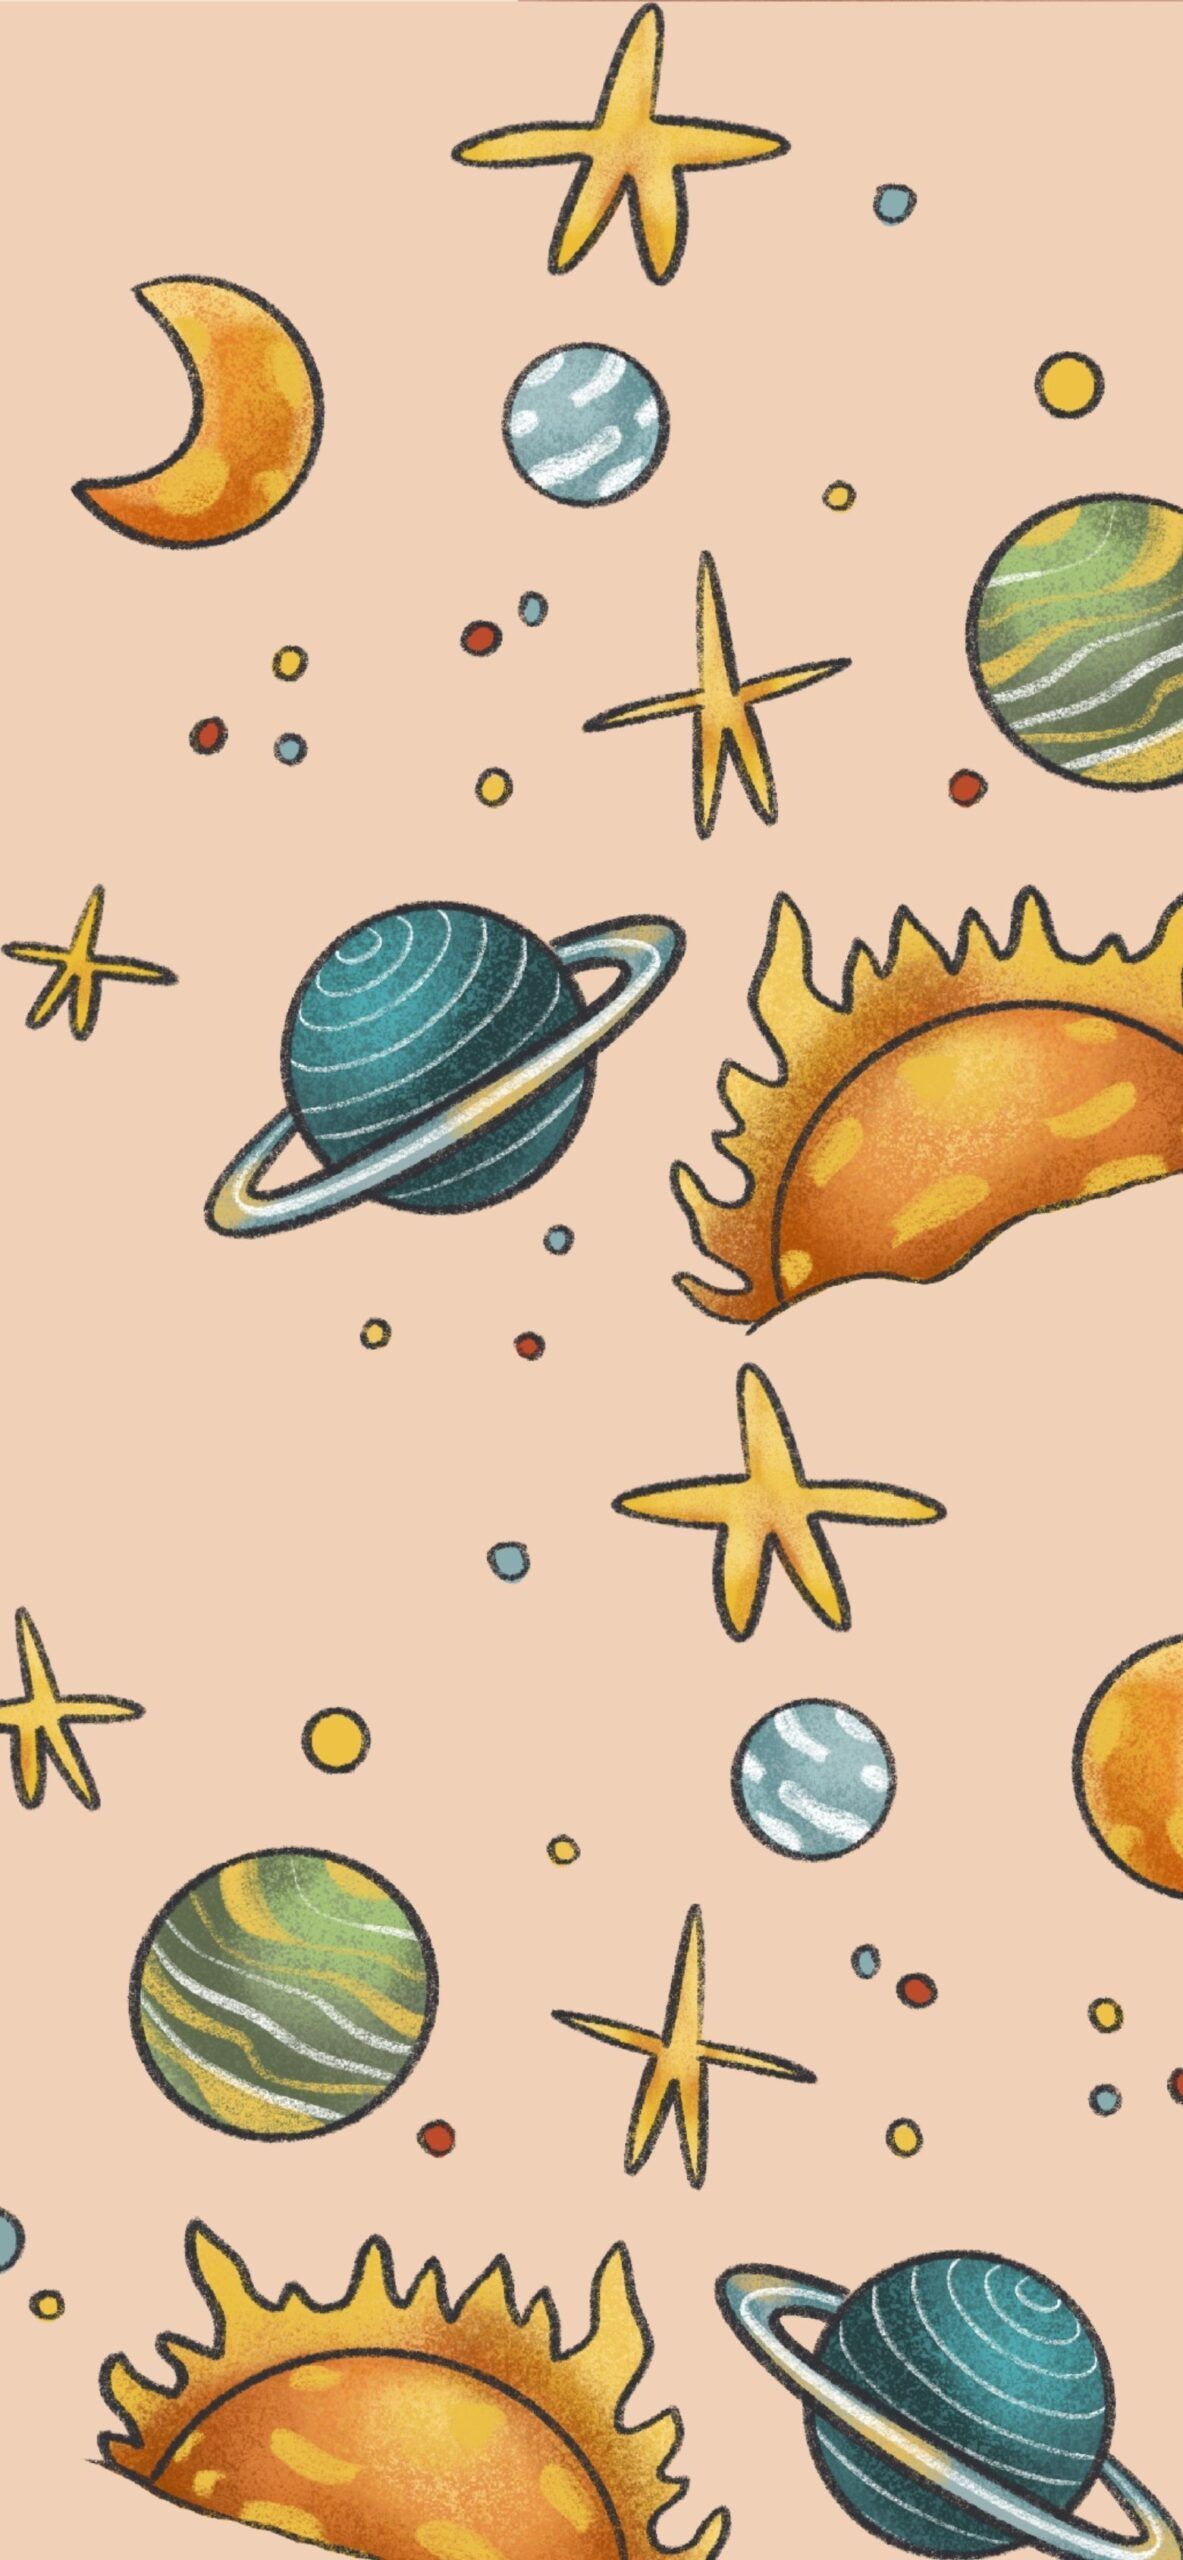 A pattern of planets and stars in space - Clean, pretty, cute